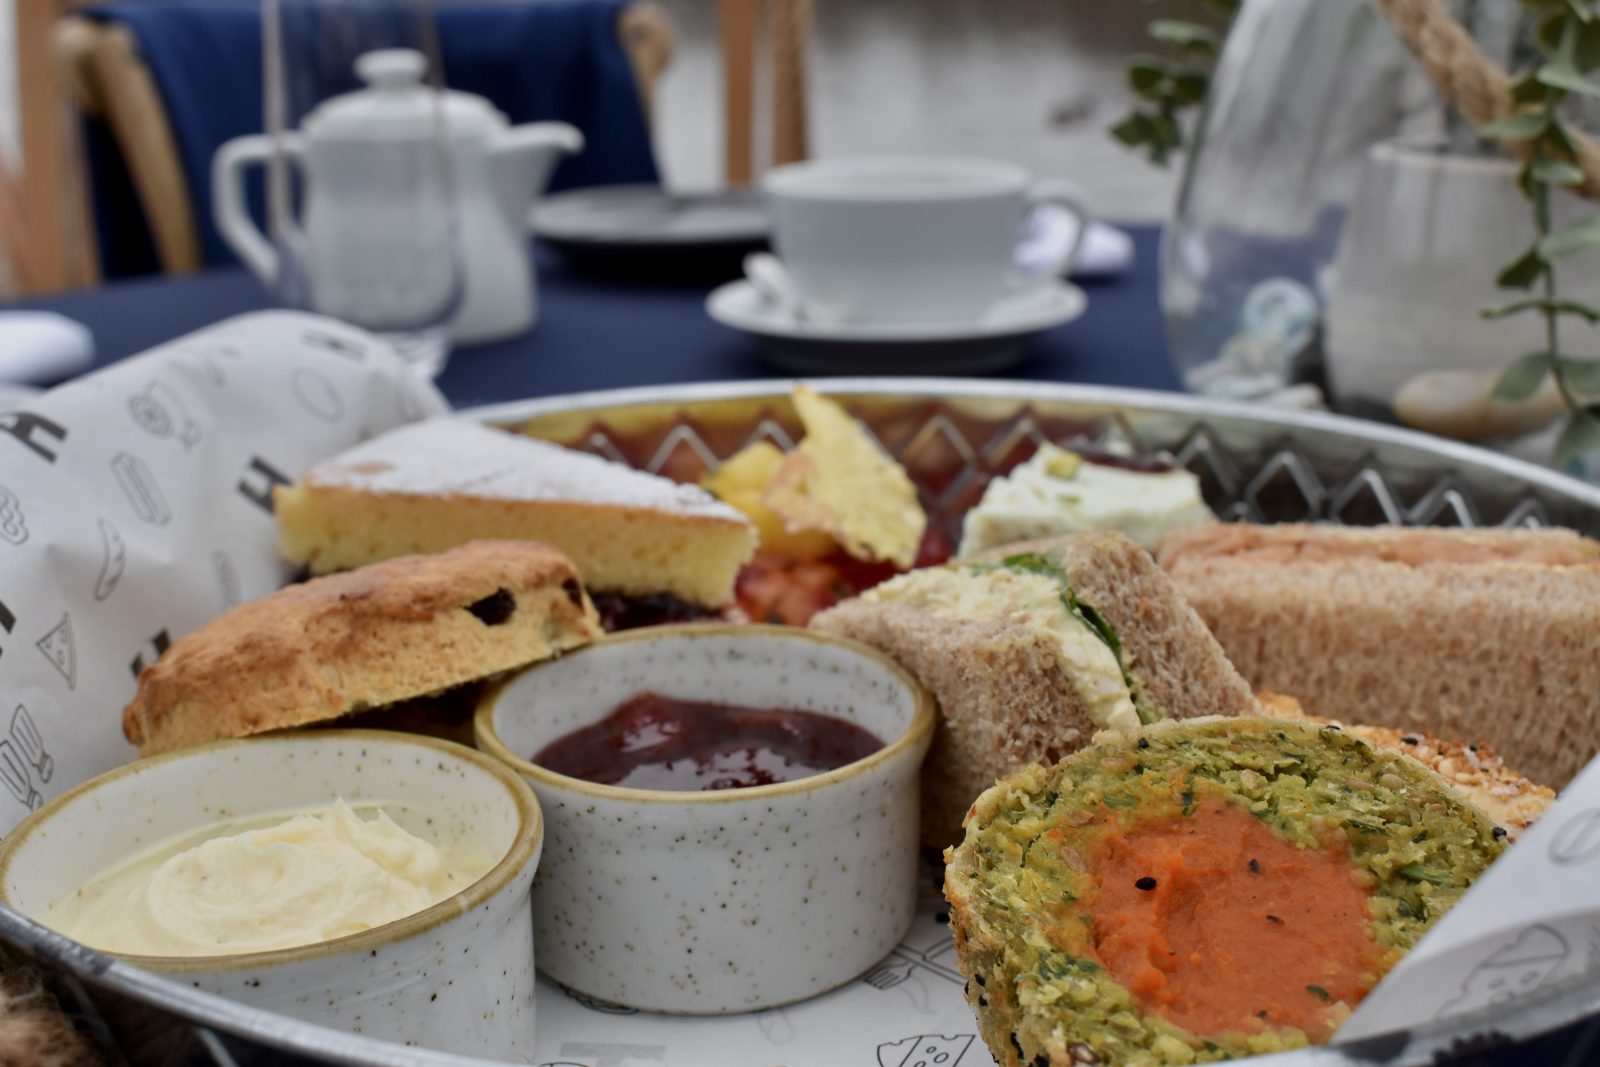 Scenic lakeside dining domes open for afternoon tea at Heaton Park, The Manc